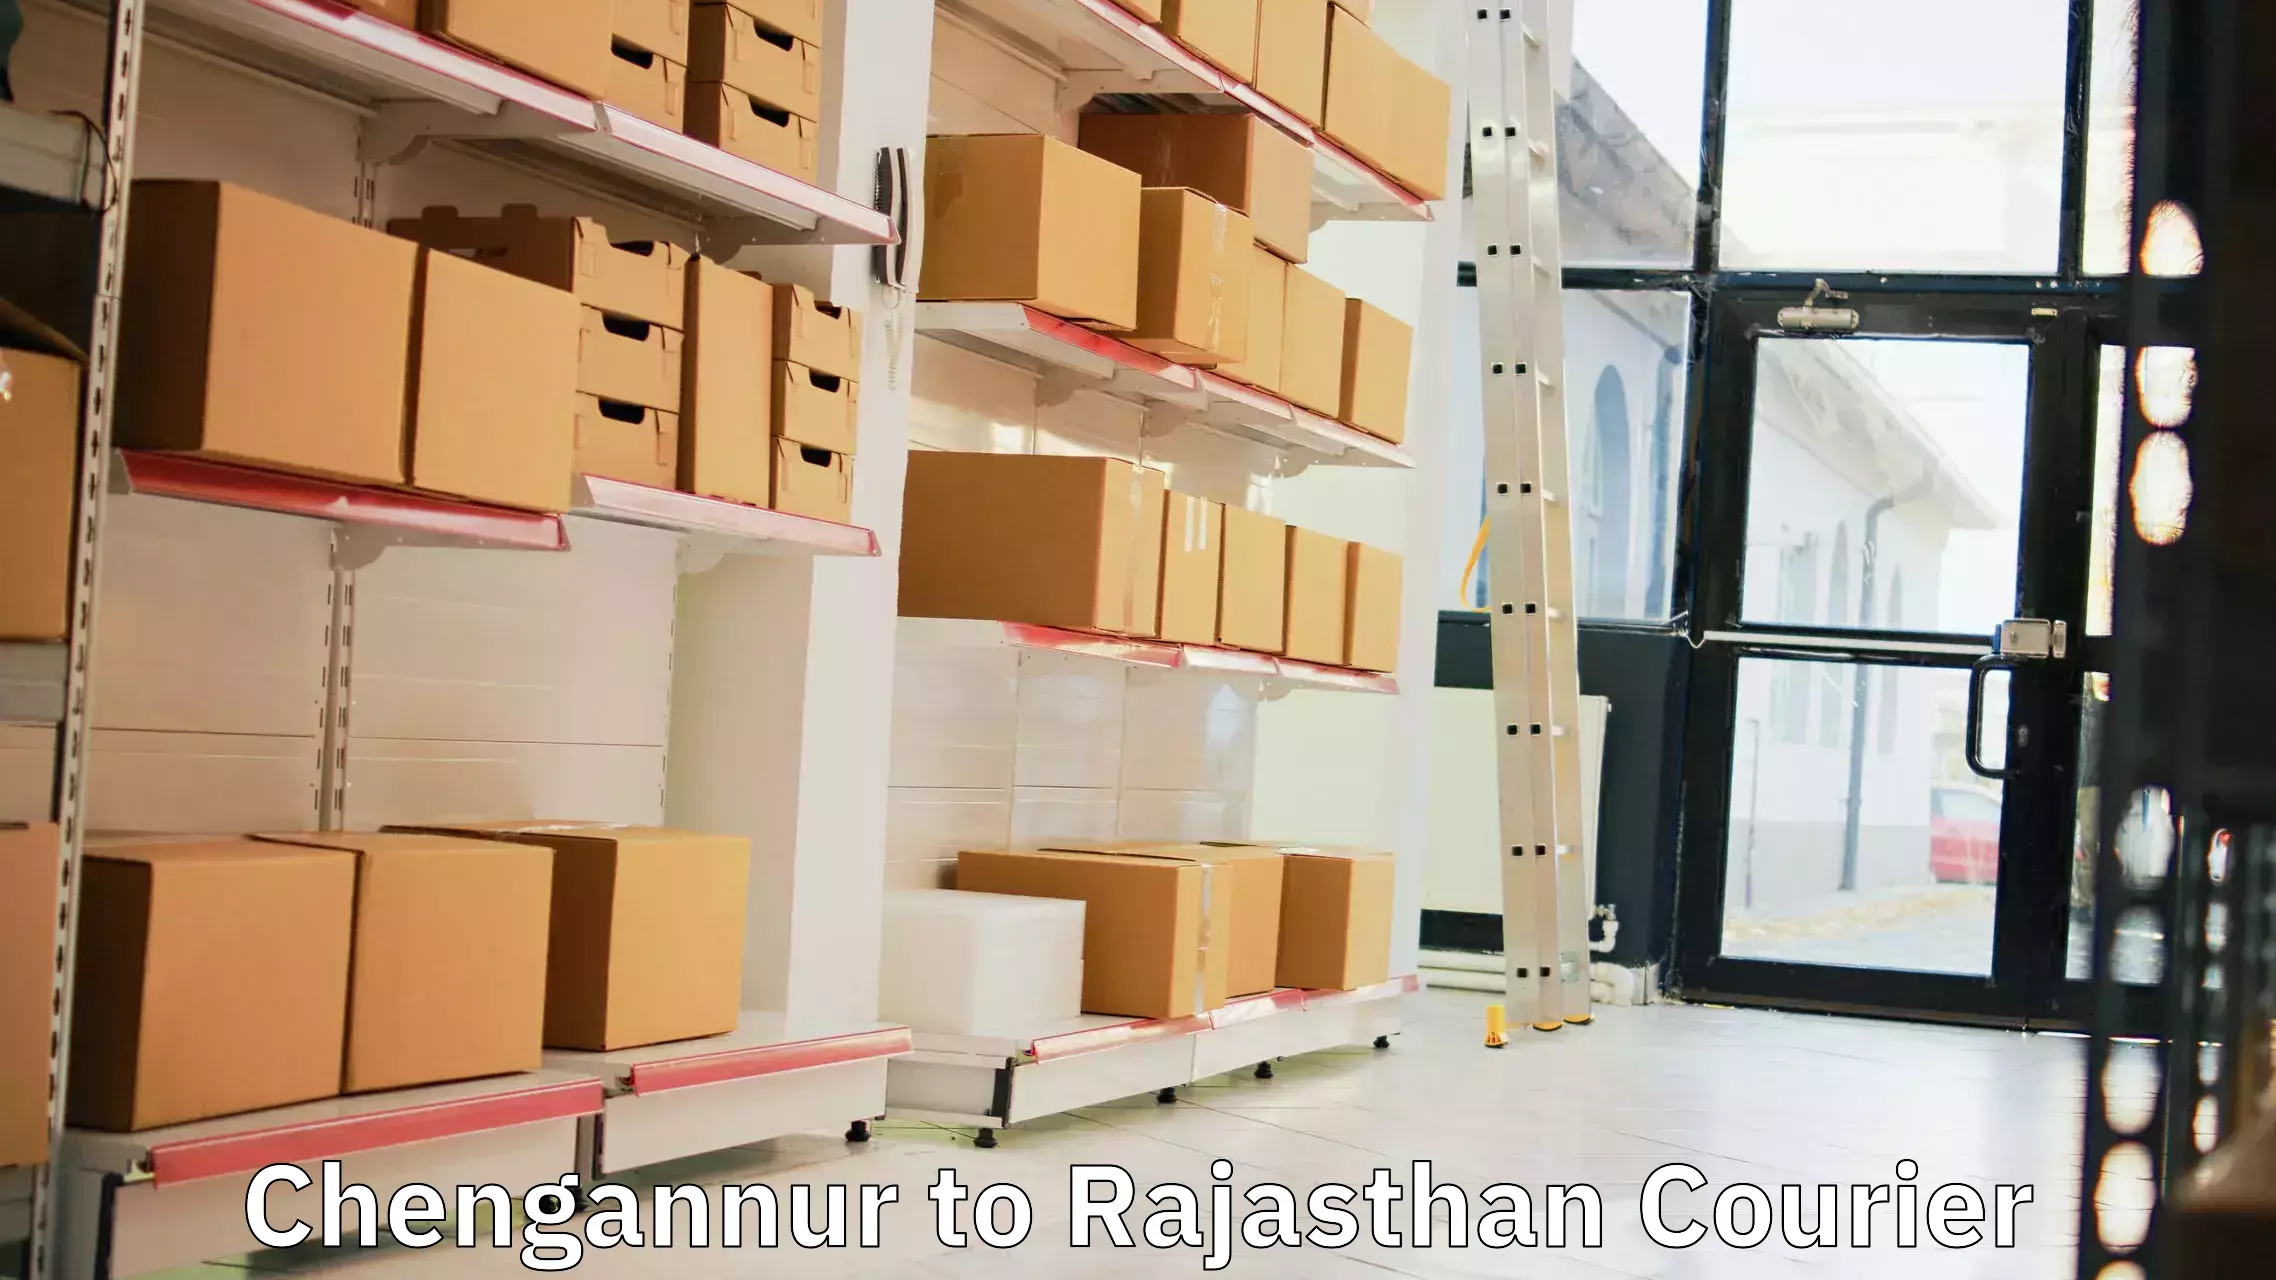 Courier service innovation Chengannur to Danta Ramgarh